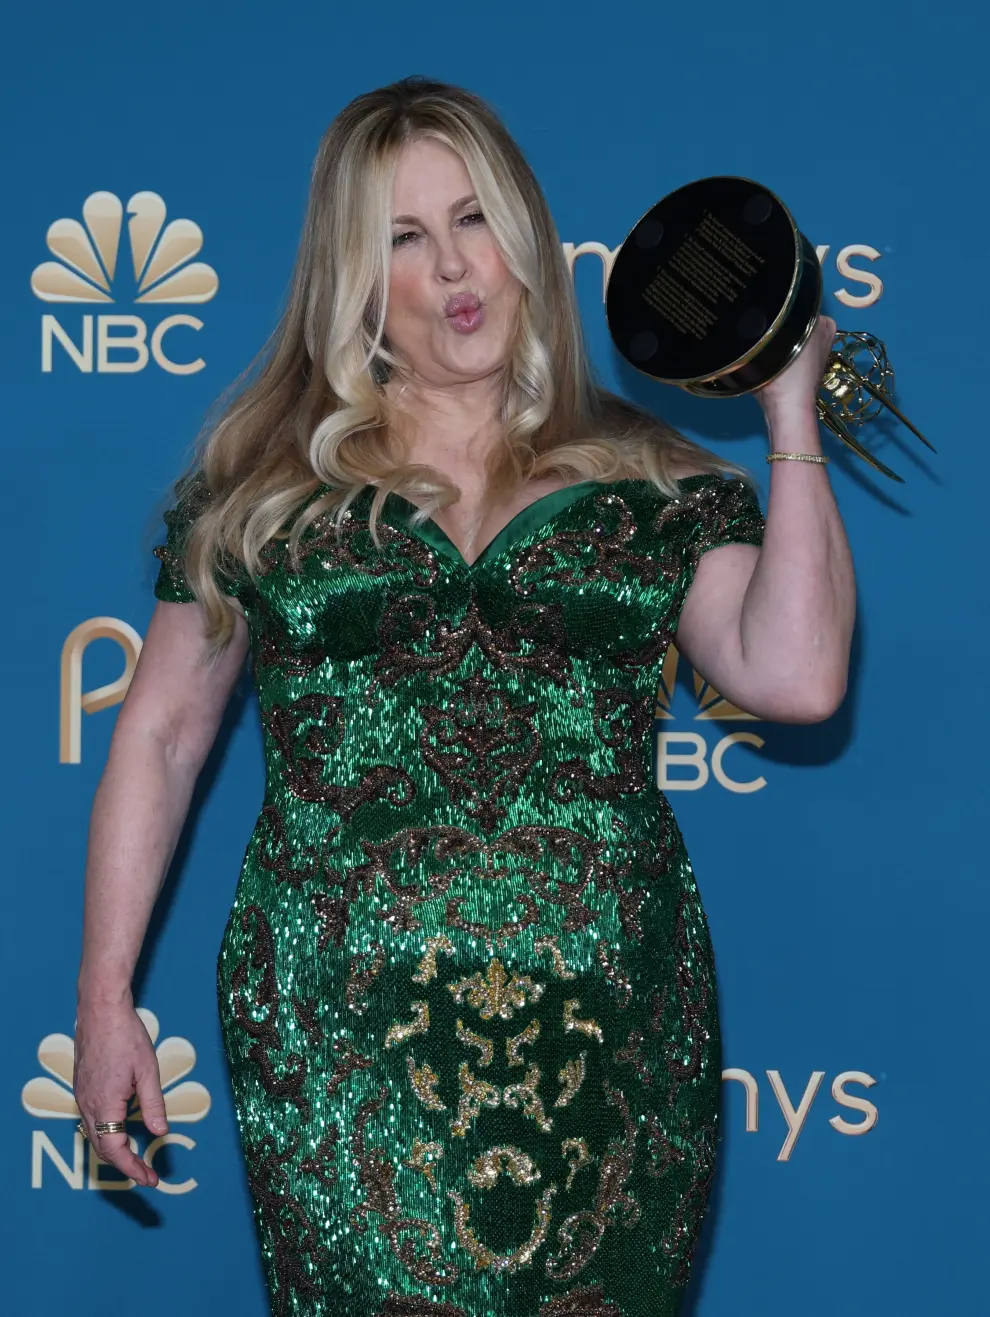 Jennifer Coolidge holds her Emmy for Outstanding Supporting Actress in a Limited or Anthology Series or Movie for "The White Lotus" at the 74th Primetime Emmy Awards held at the Microsoft Theater in Los Angeles, U.S., September 12, 2022. REUTERS/Aude Guerrucci AWARDS-EMMYS/